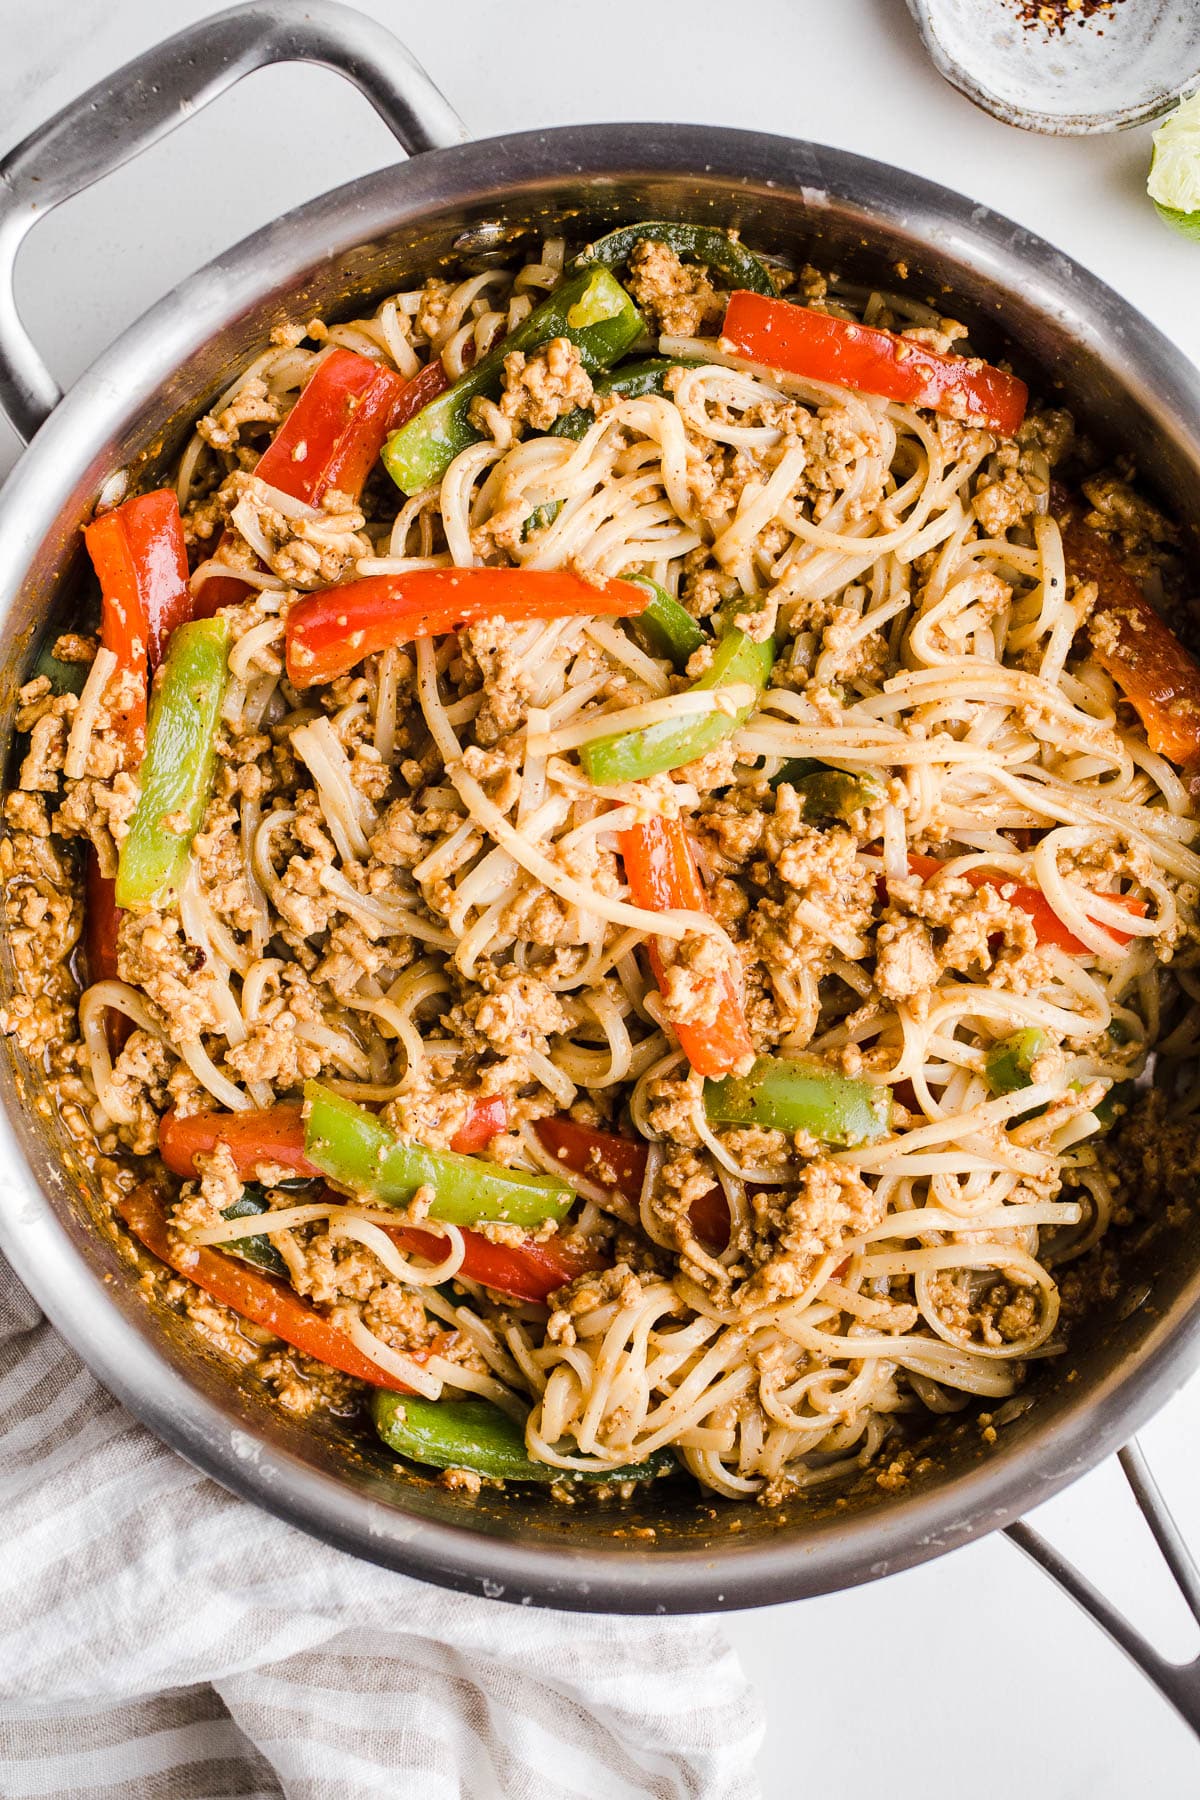 Noodle, meat, and veggies in a large skillet.